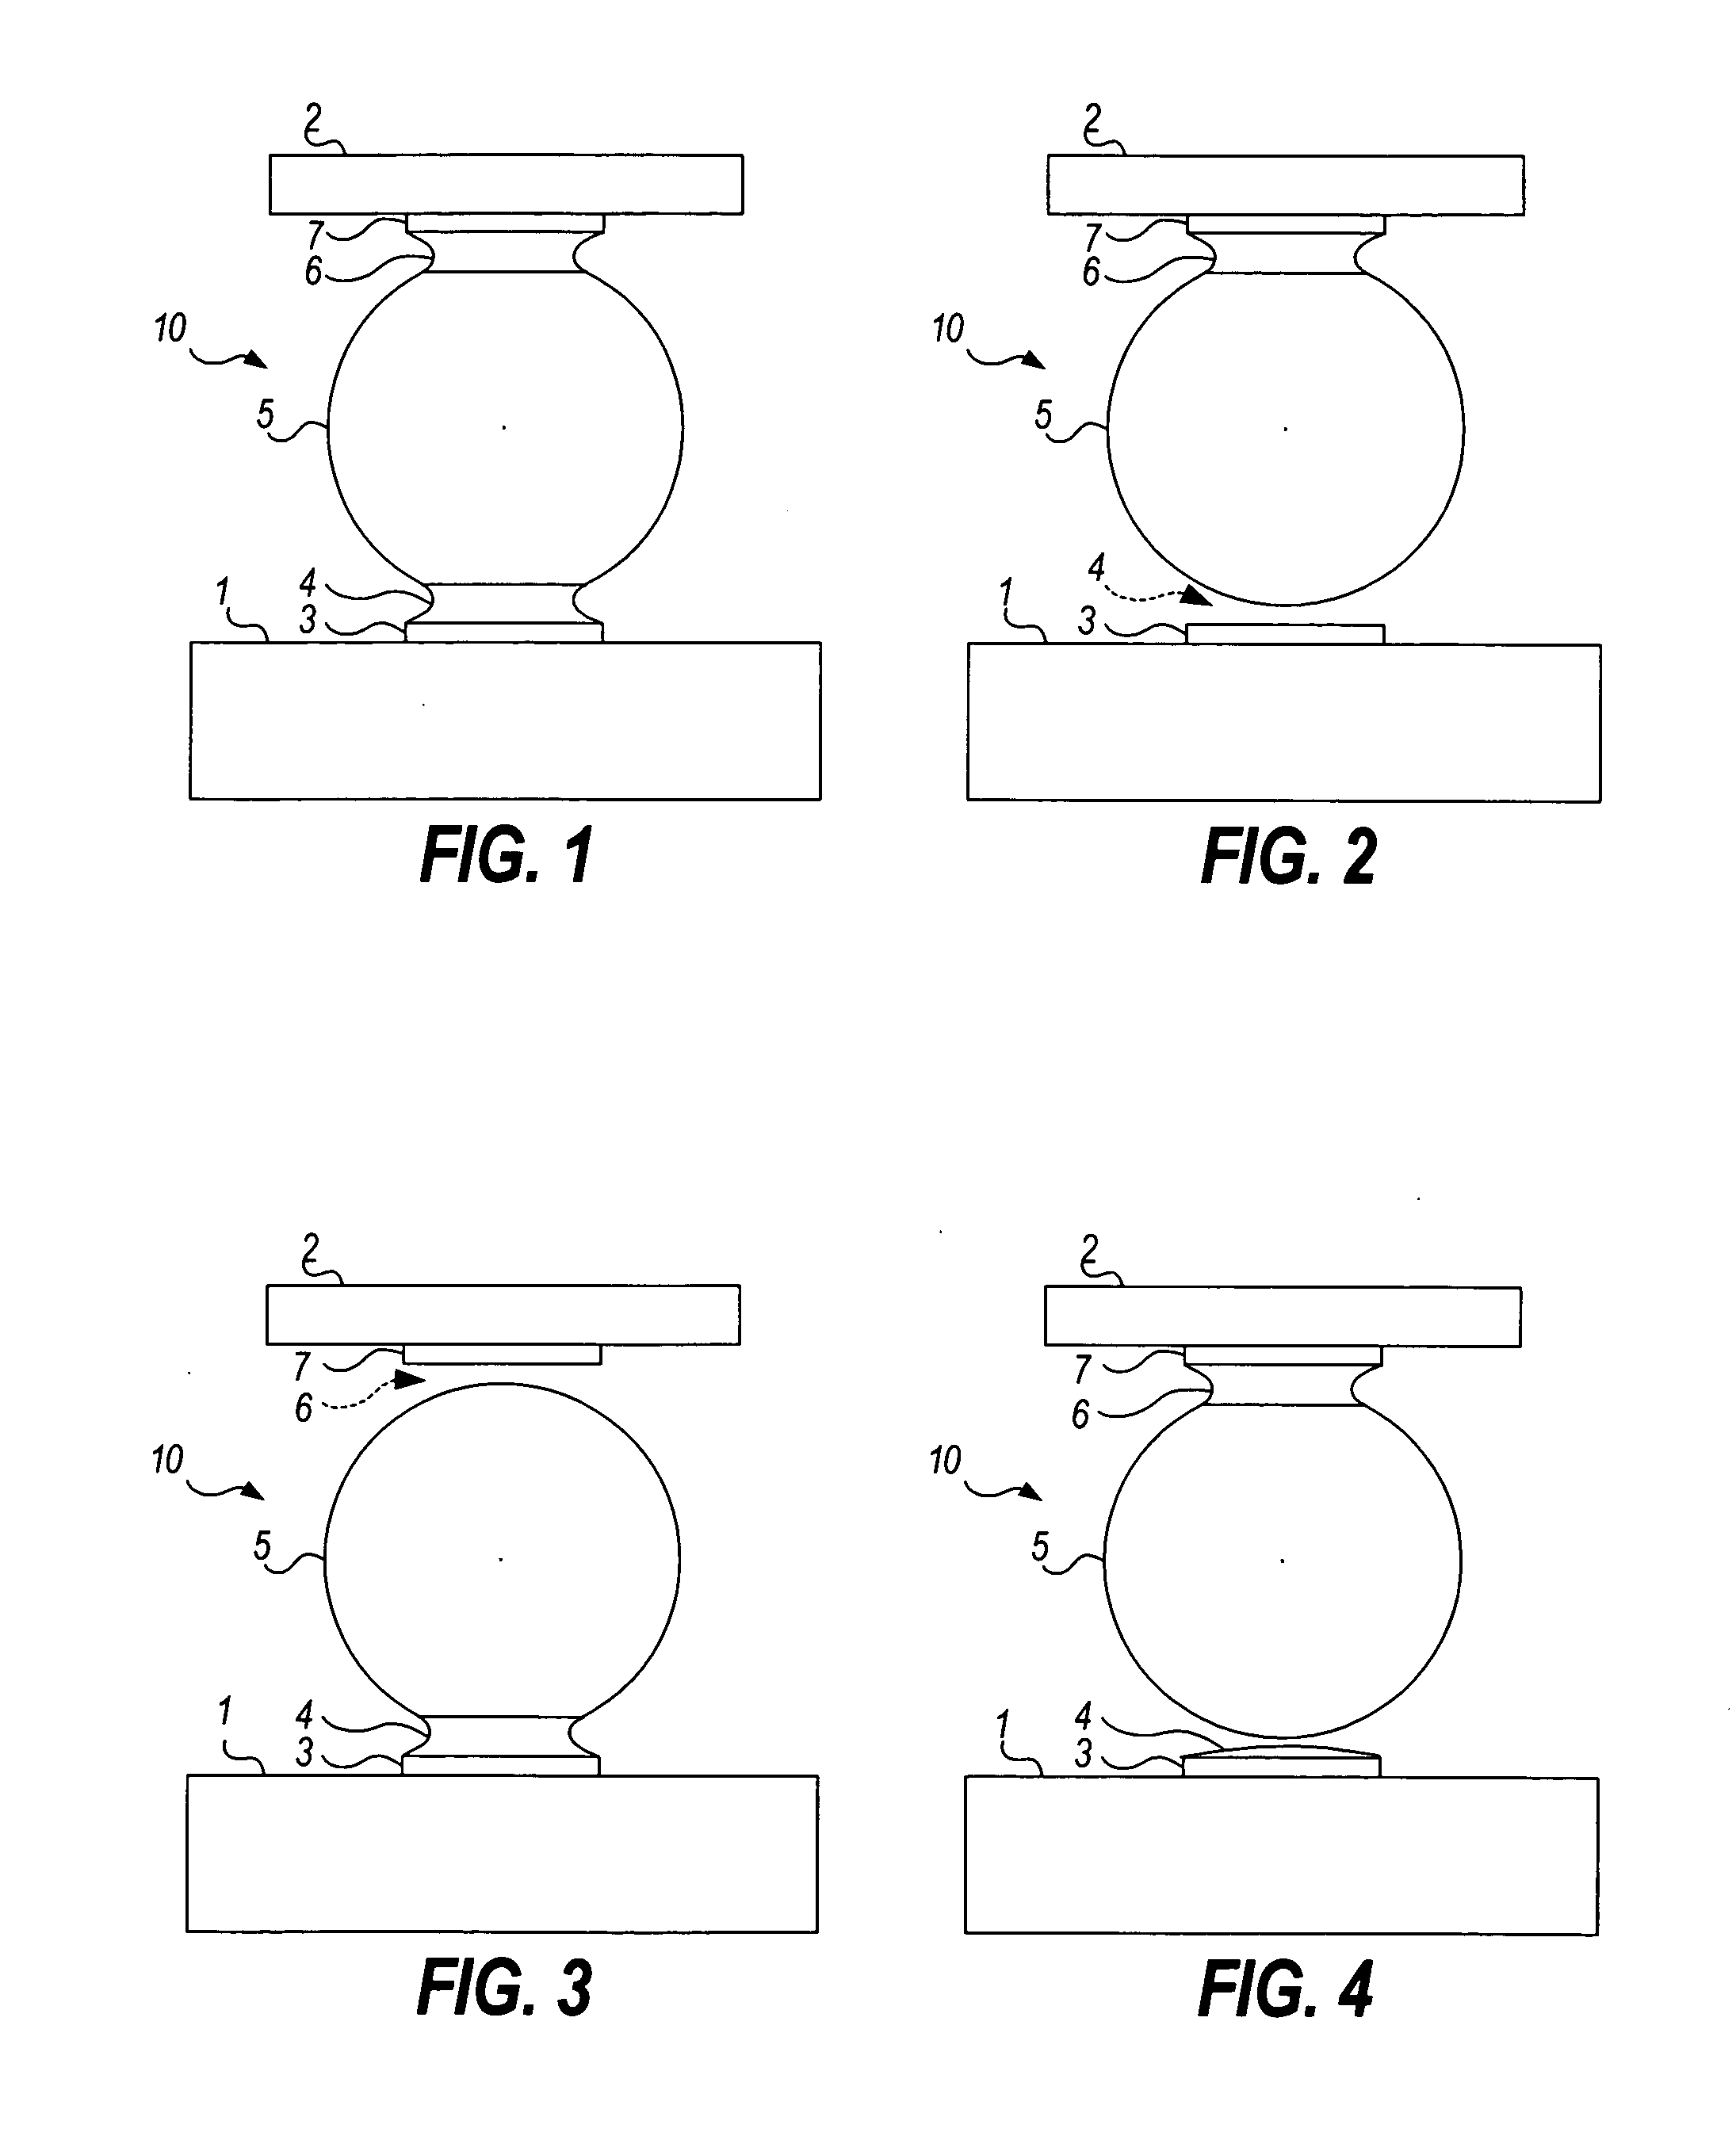 Highly constrained tomography for automated inspection of area arrays